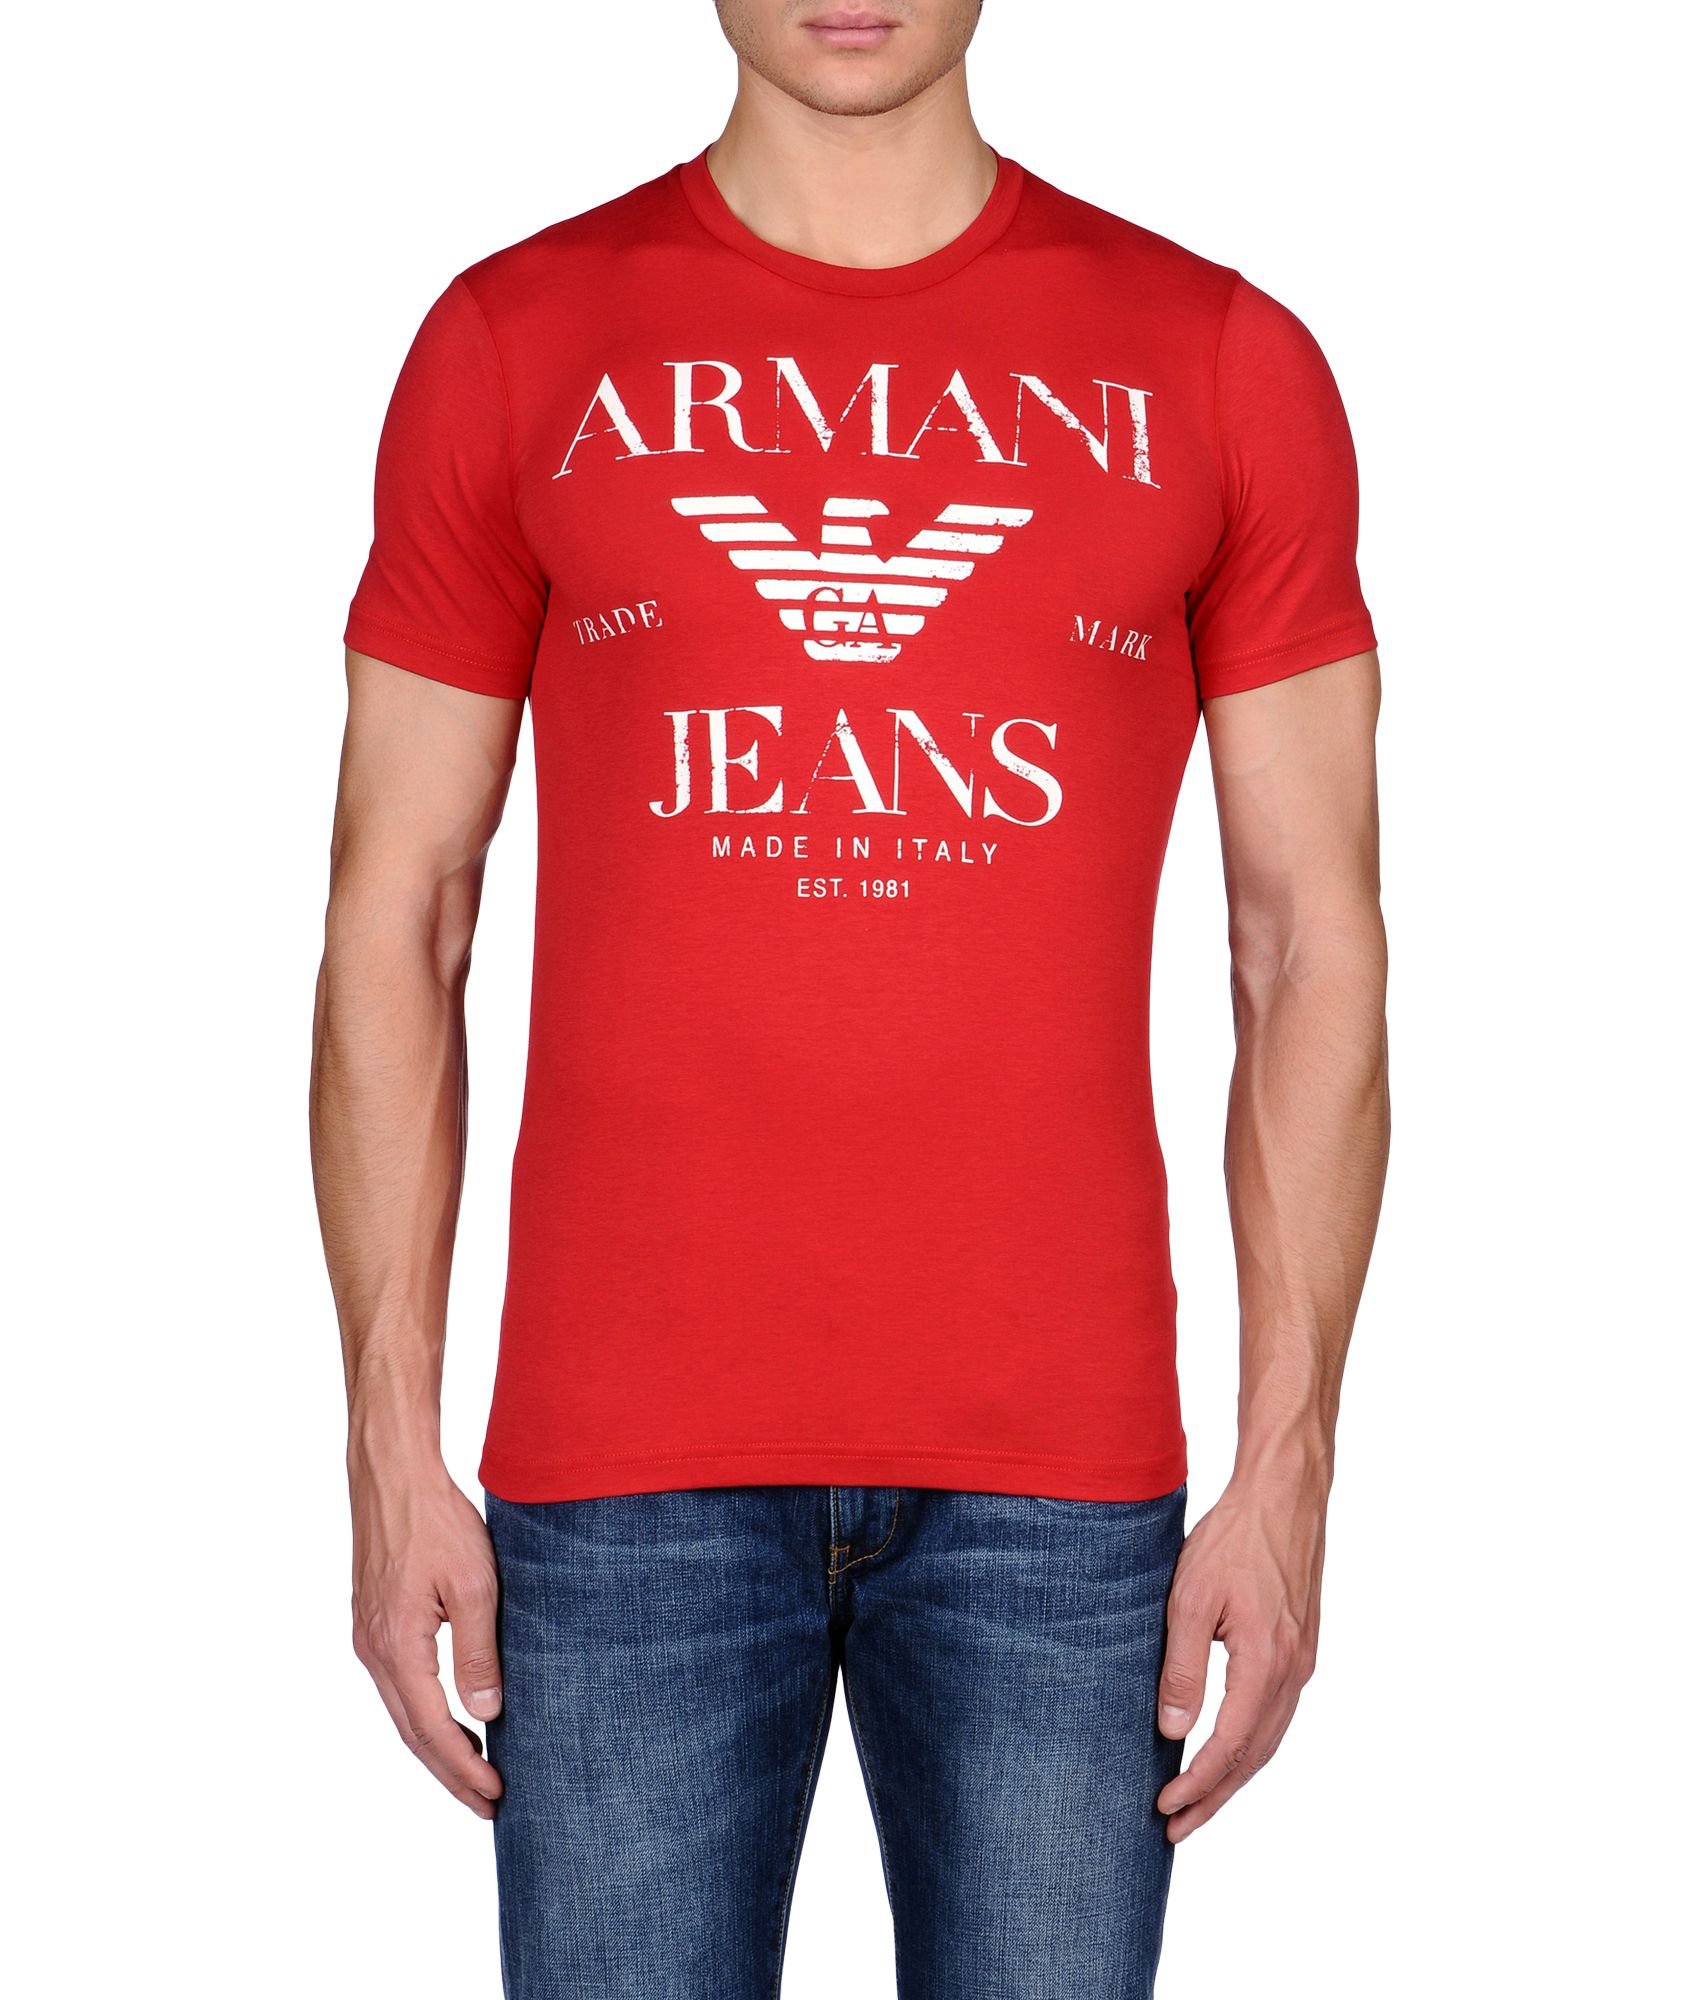 Armani Jeans Print Tshirt in Red for Men - Lyst